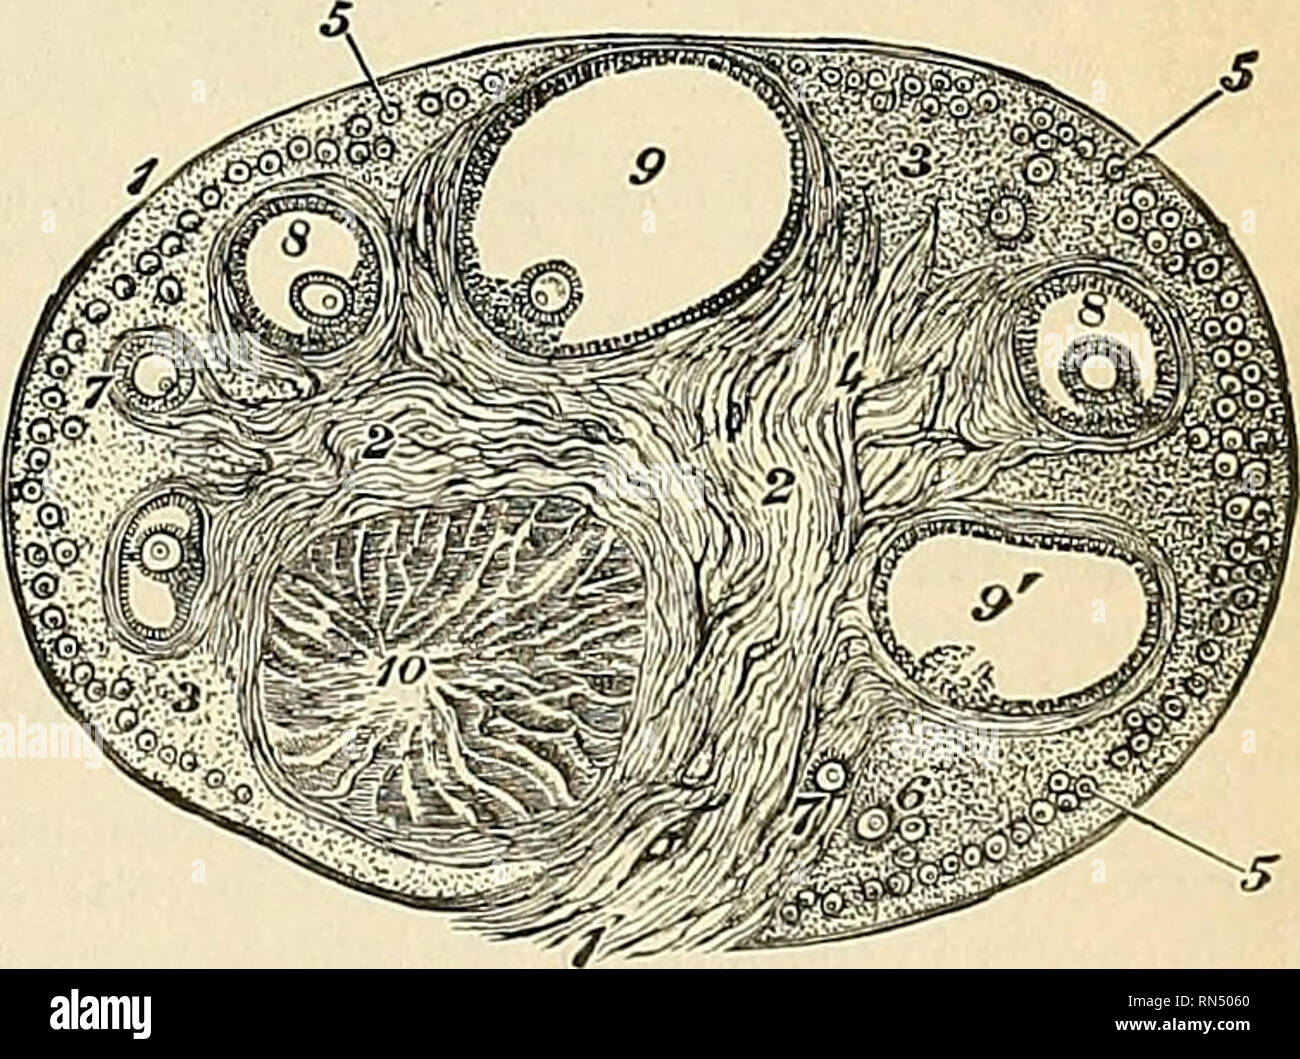 . Anatomy, descriptive and applied. Anatomy. Fig. 1174.—Diagrammatic representation of the female reproductive organs and their relations to the bladder and urethra, lateral view. (Toldt.) Structure (Figs. 1175, 1176, and 1184).—The ovary consists of the cortex and medulla, in the former of which are founi) the Graafian follicles and theu- remains and the hilum of the ovary. The cortex consists of stroma and Graafian follicles. Peripherally, the stroma is condensed to form a capsule, the tunica albuginea, which is covered by a layer of cuboidal epithelial cells called the germinal epithelium,  Stock Photo